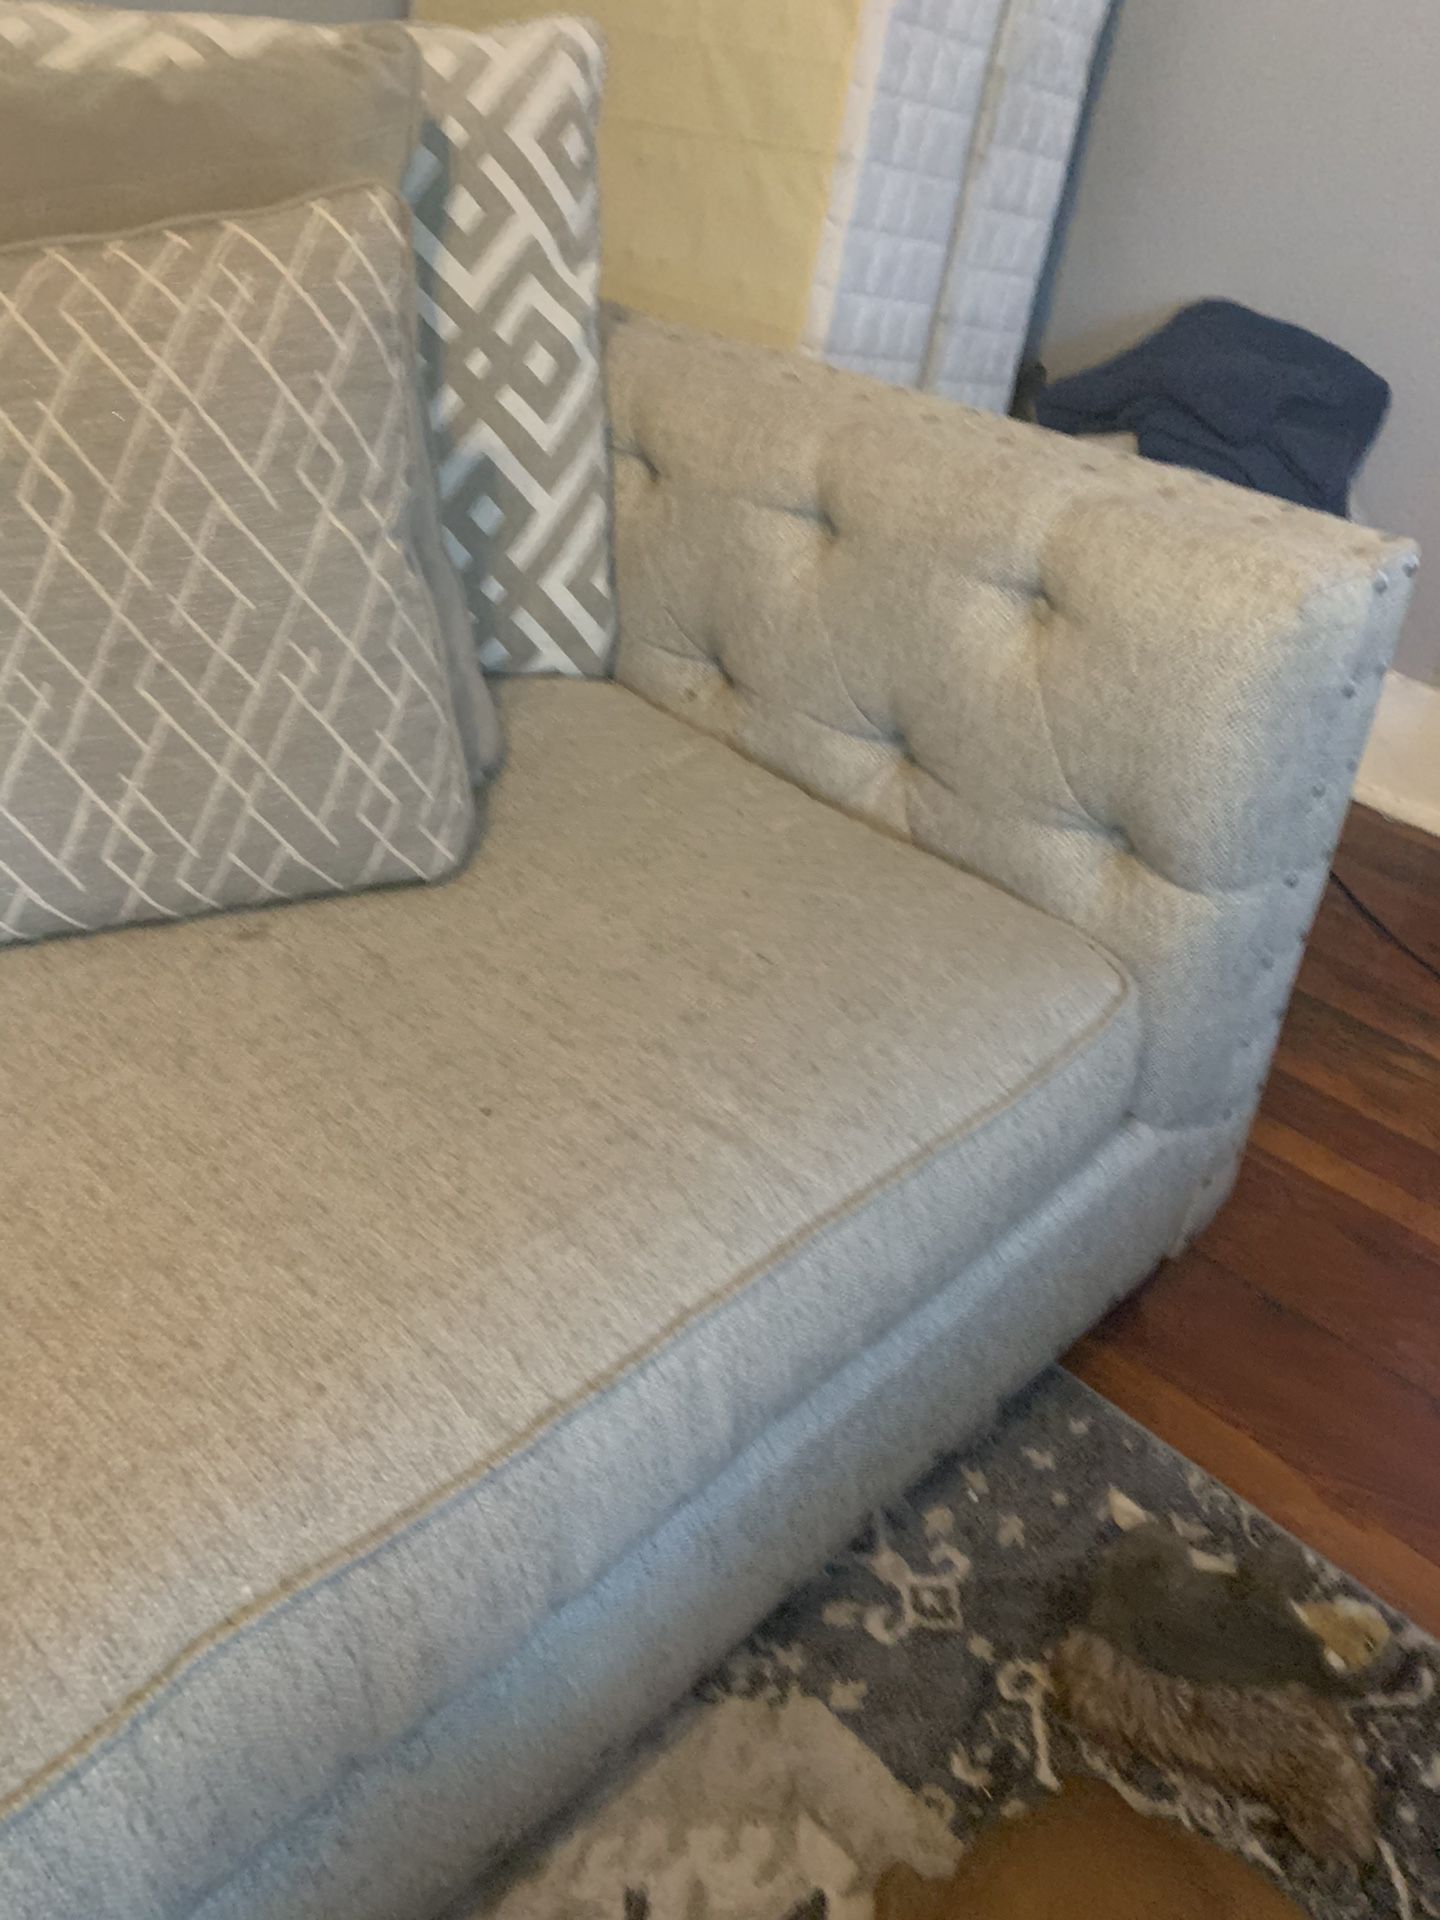 Beige and grey couch.